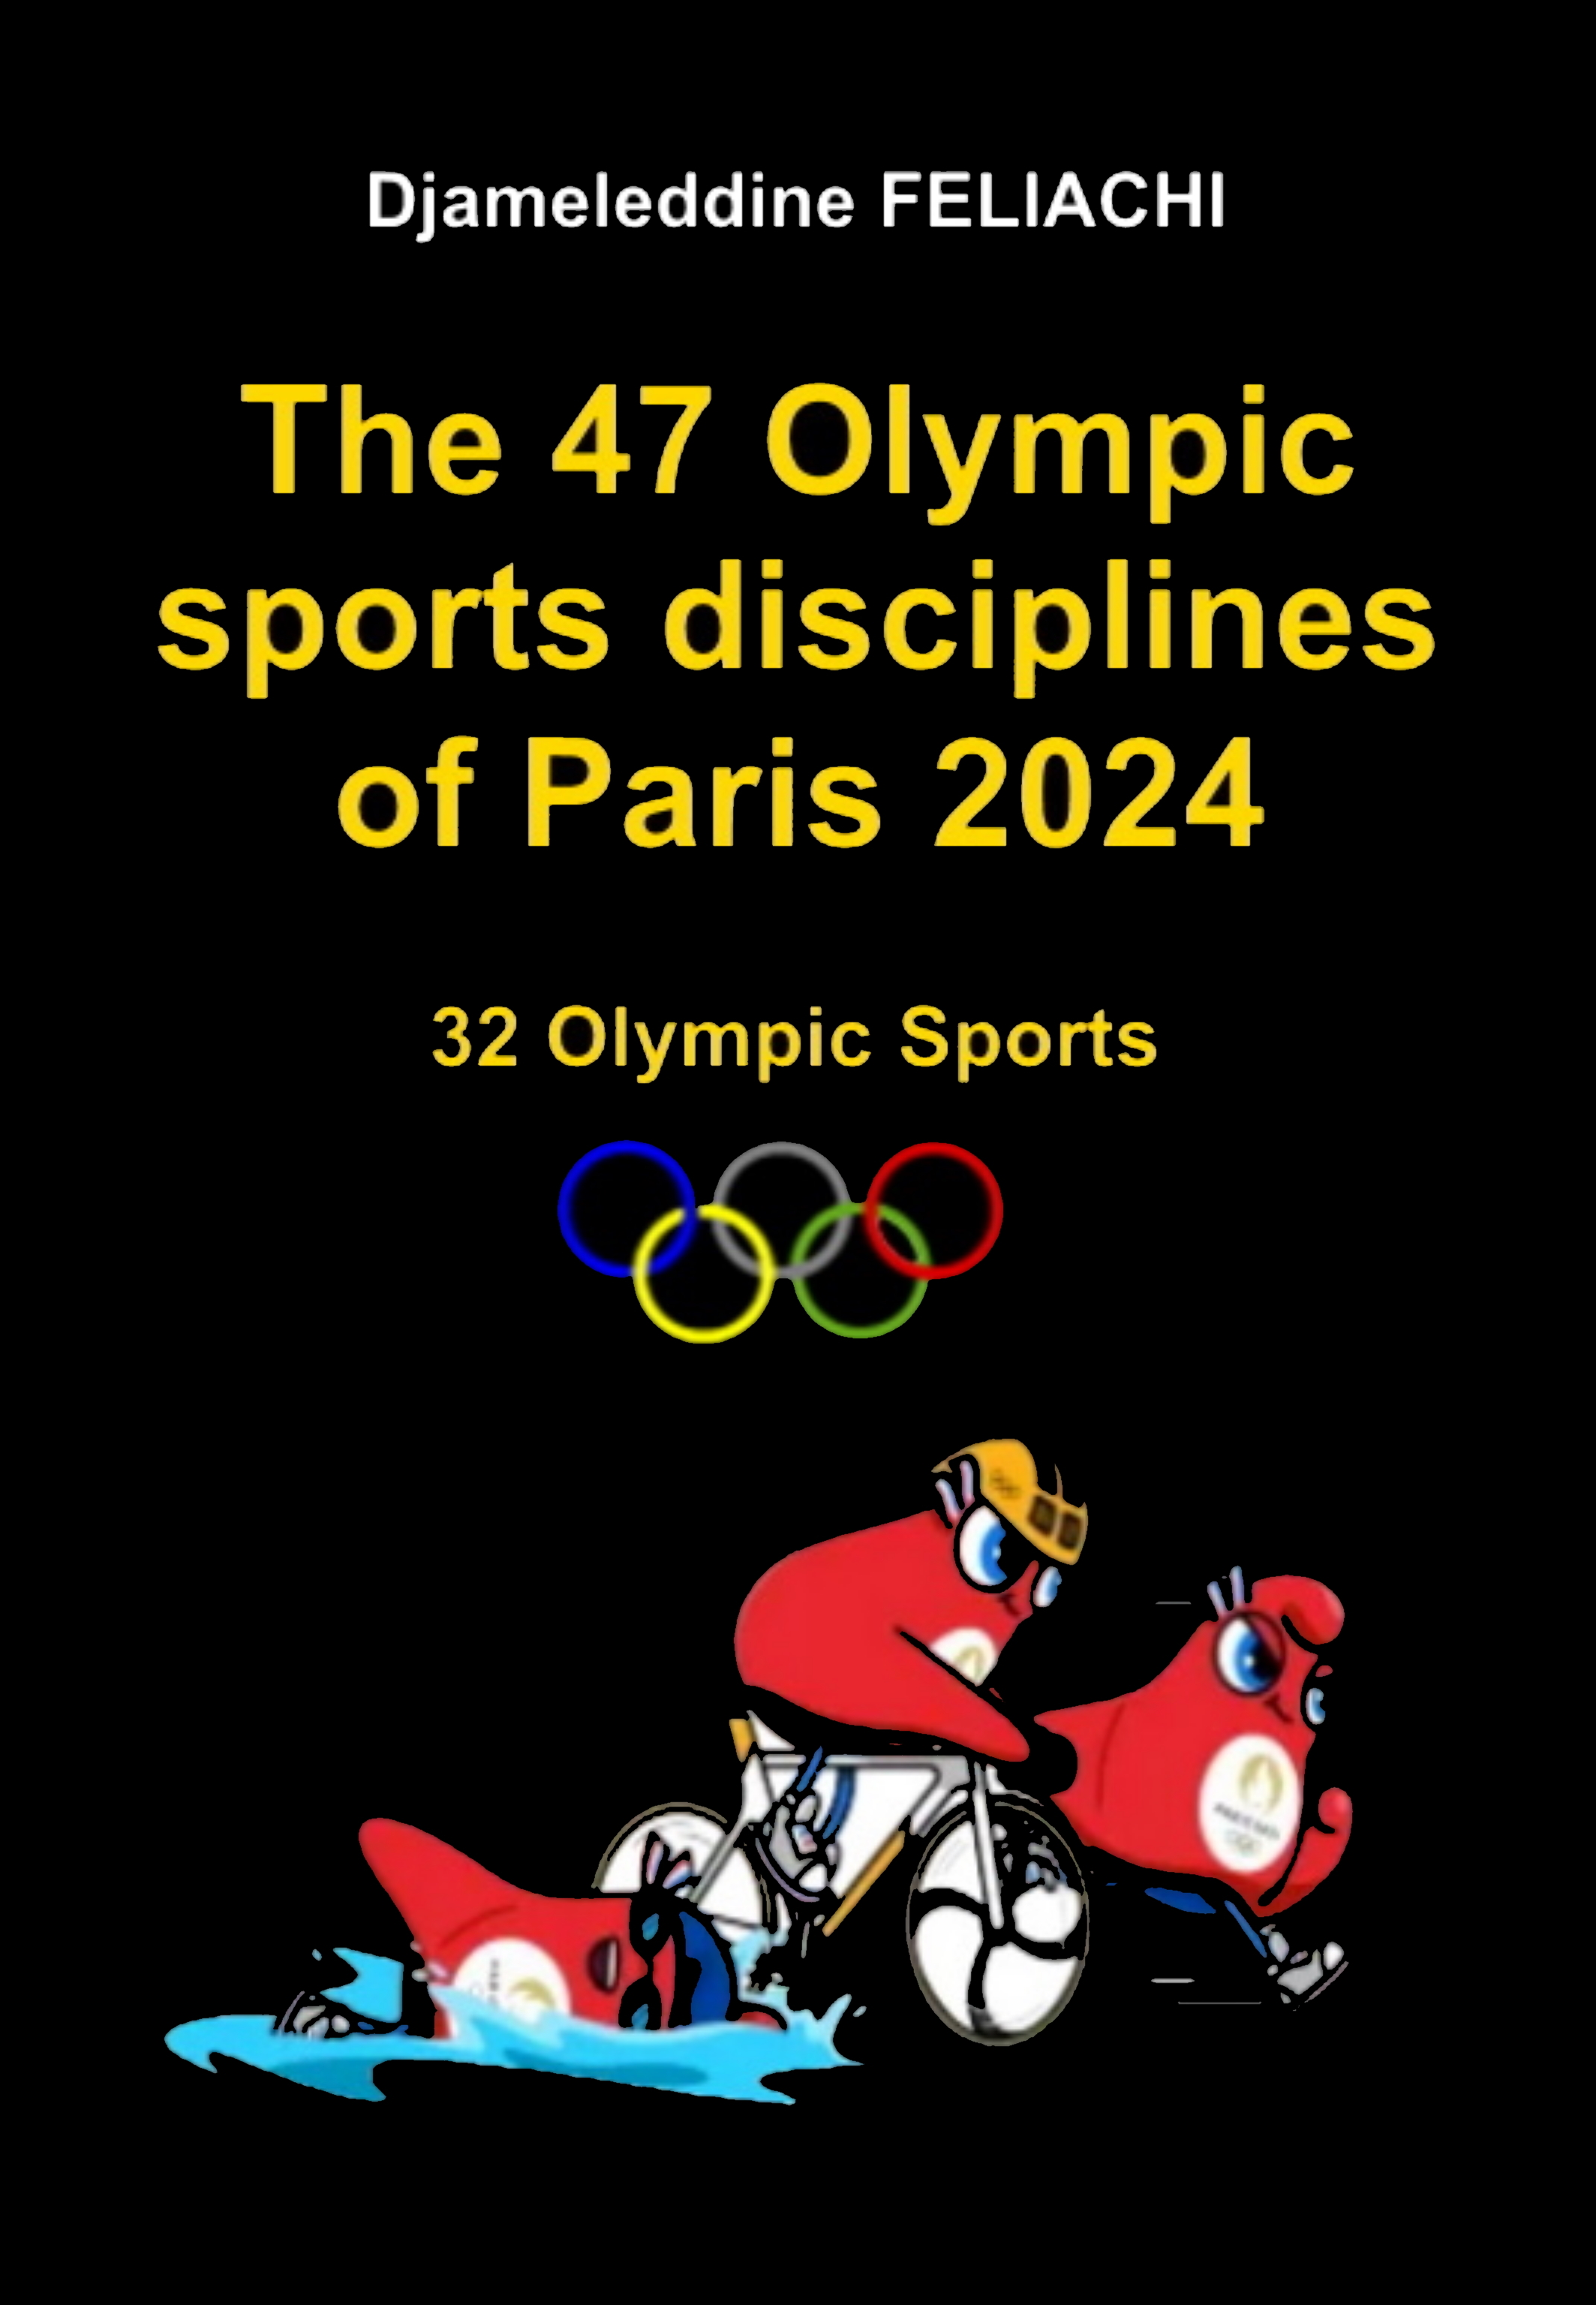 The 47 Olympic sports disciplines